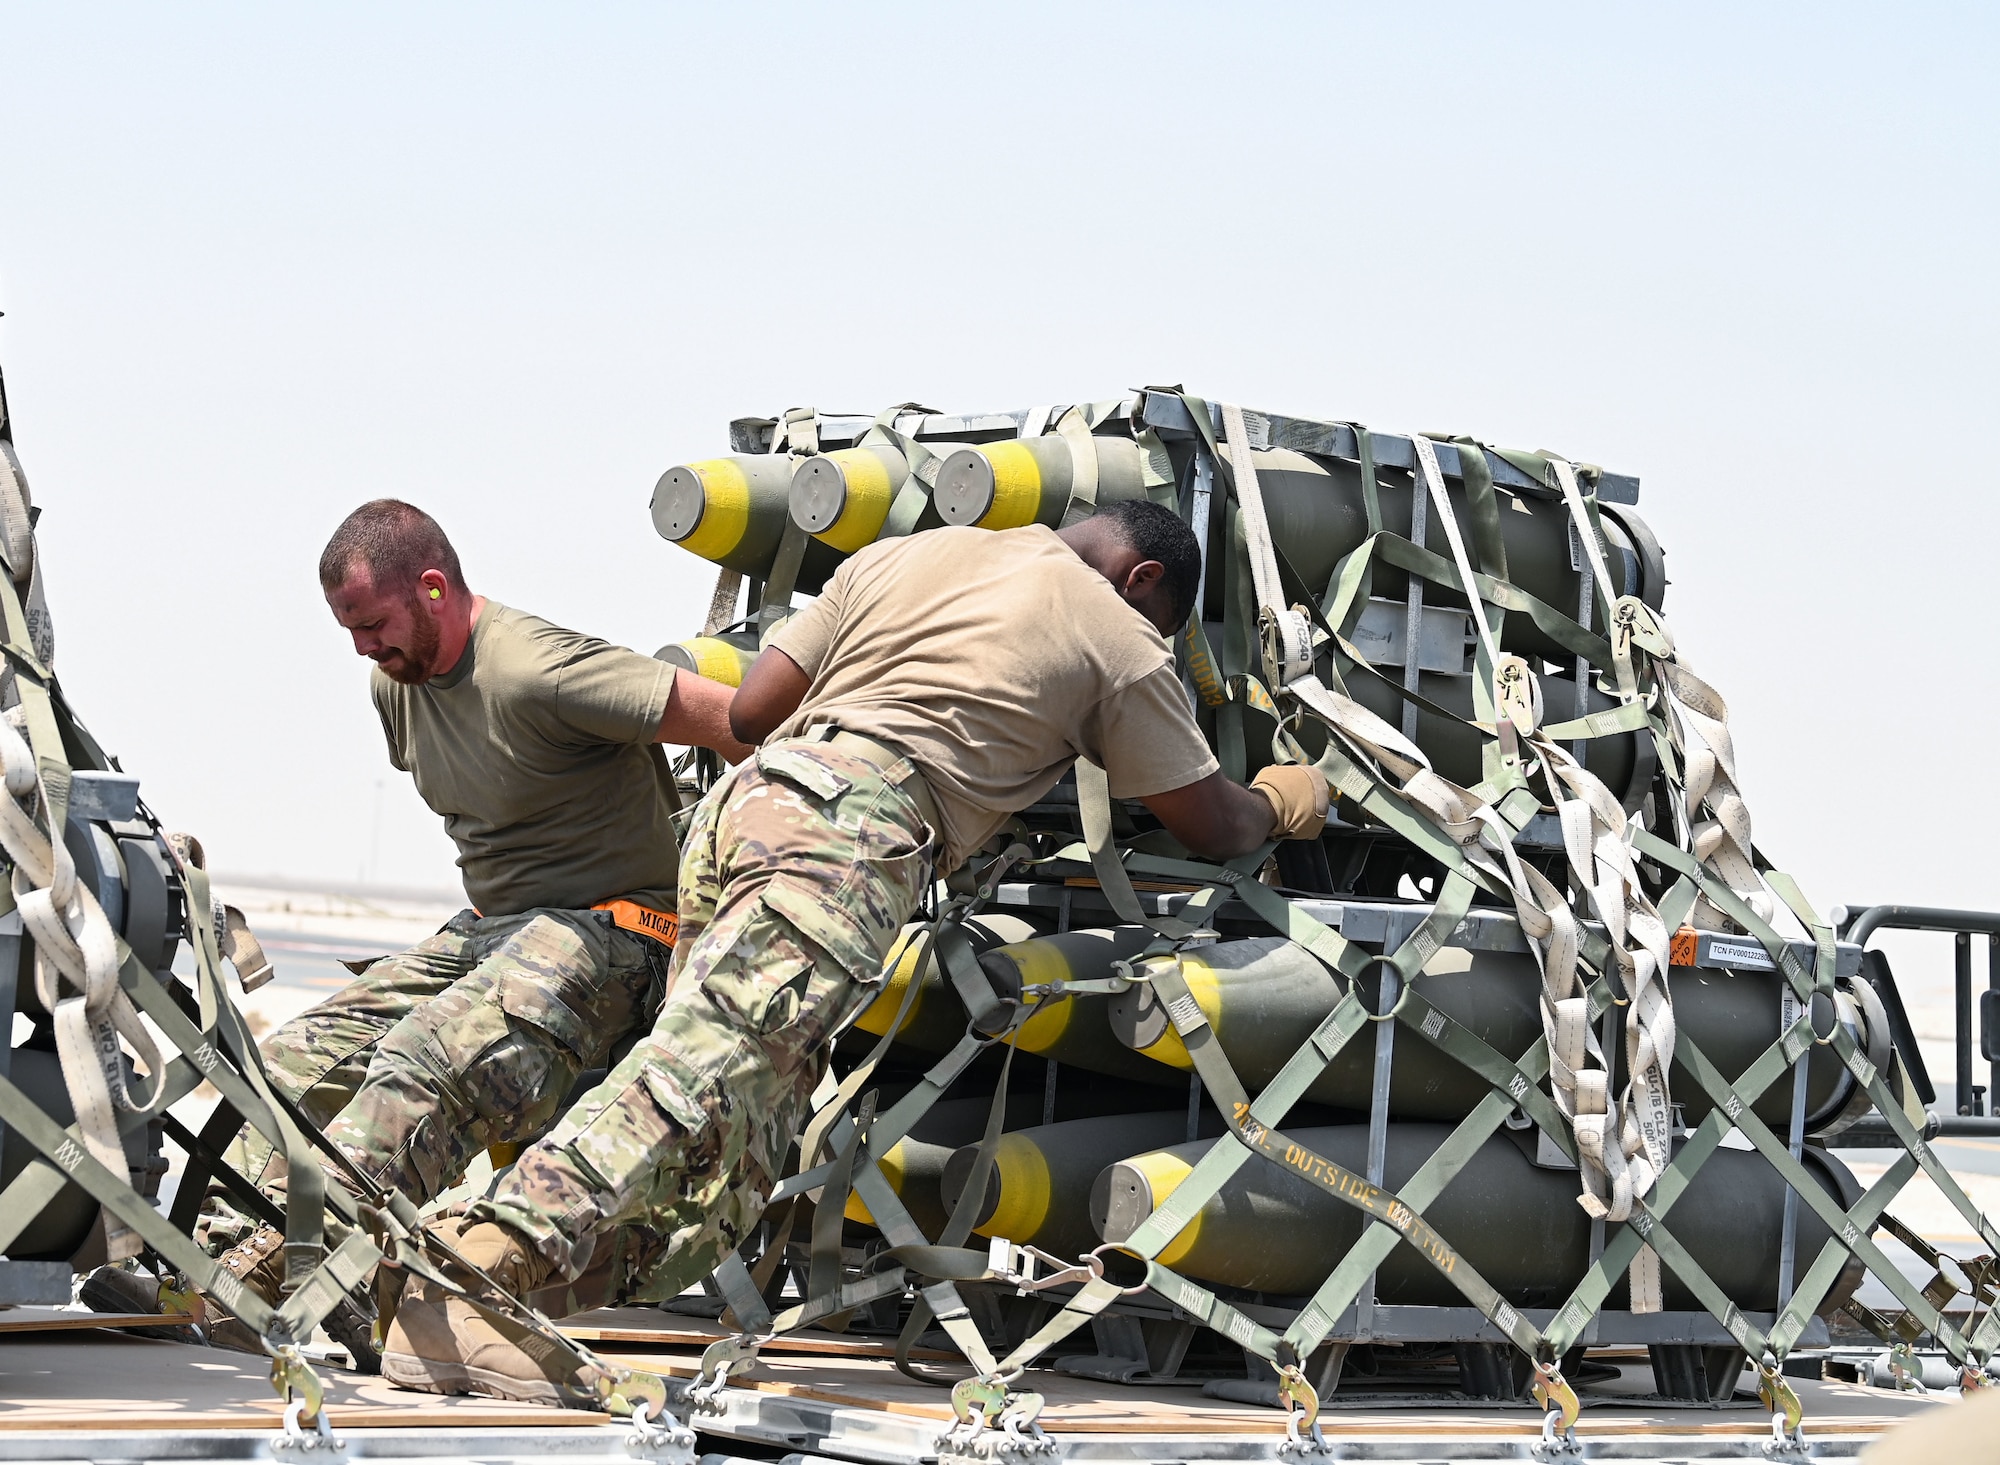 Airmen from 379th Expeditionary Readiness Squadron and 8th Expeditionary Air Mobility Squadron move a pallet of munitions onto a K-loader Sept. 20, 2022 at Al Udeid Air Base, Qatar.  The 379th ERLS ground transport team moved munitions from the munitions storage area to a staging area where they were later loaded onto a C-17 Globemaster III aircraft. (U.S. Air National Guard photo by Master Sgt. Michael J. Kelly)